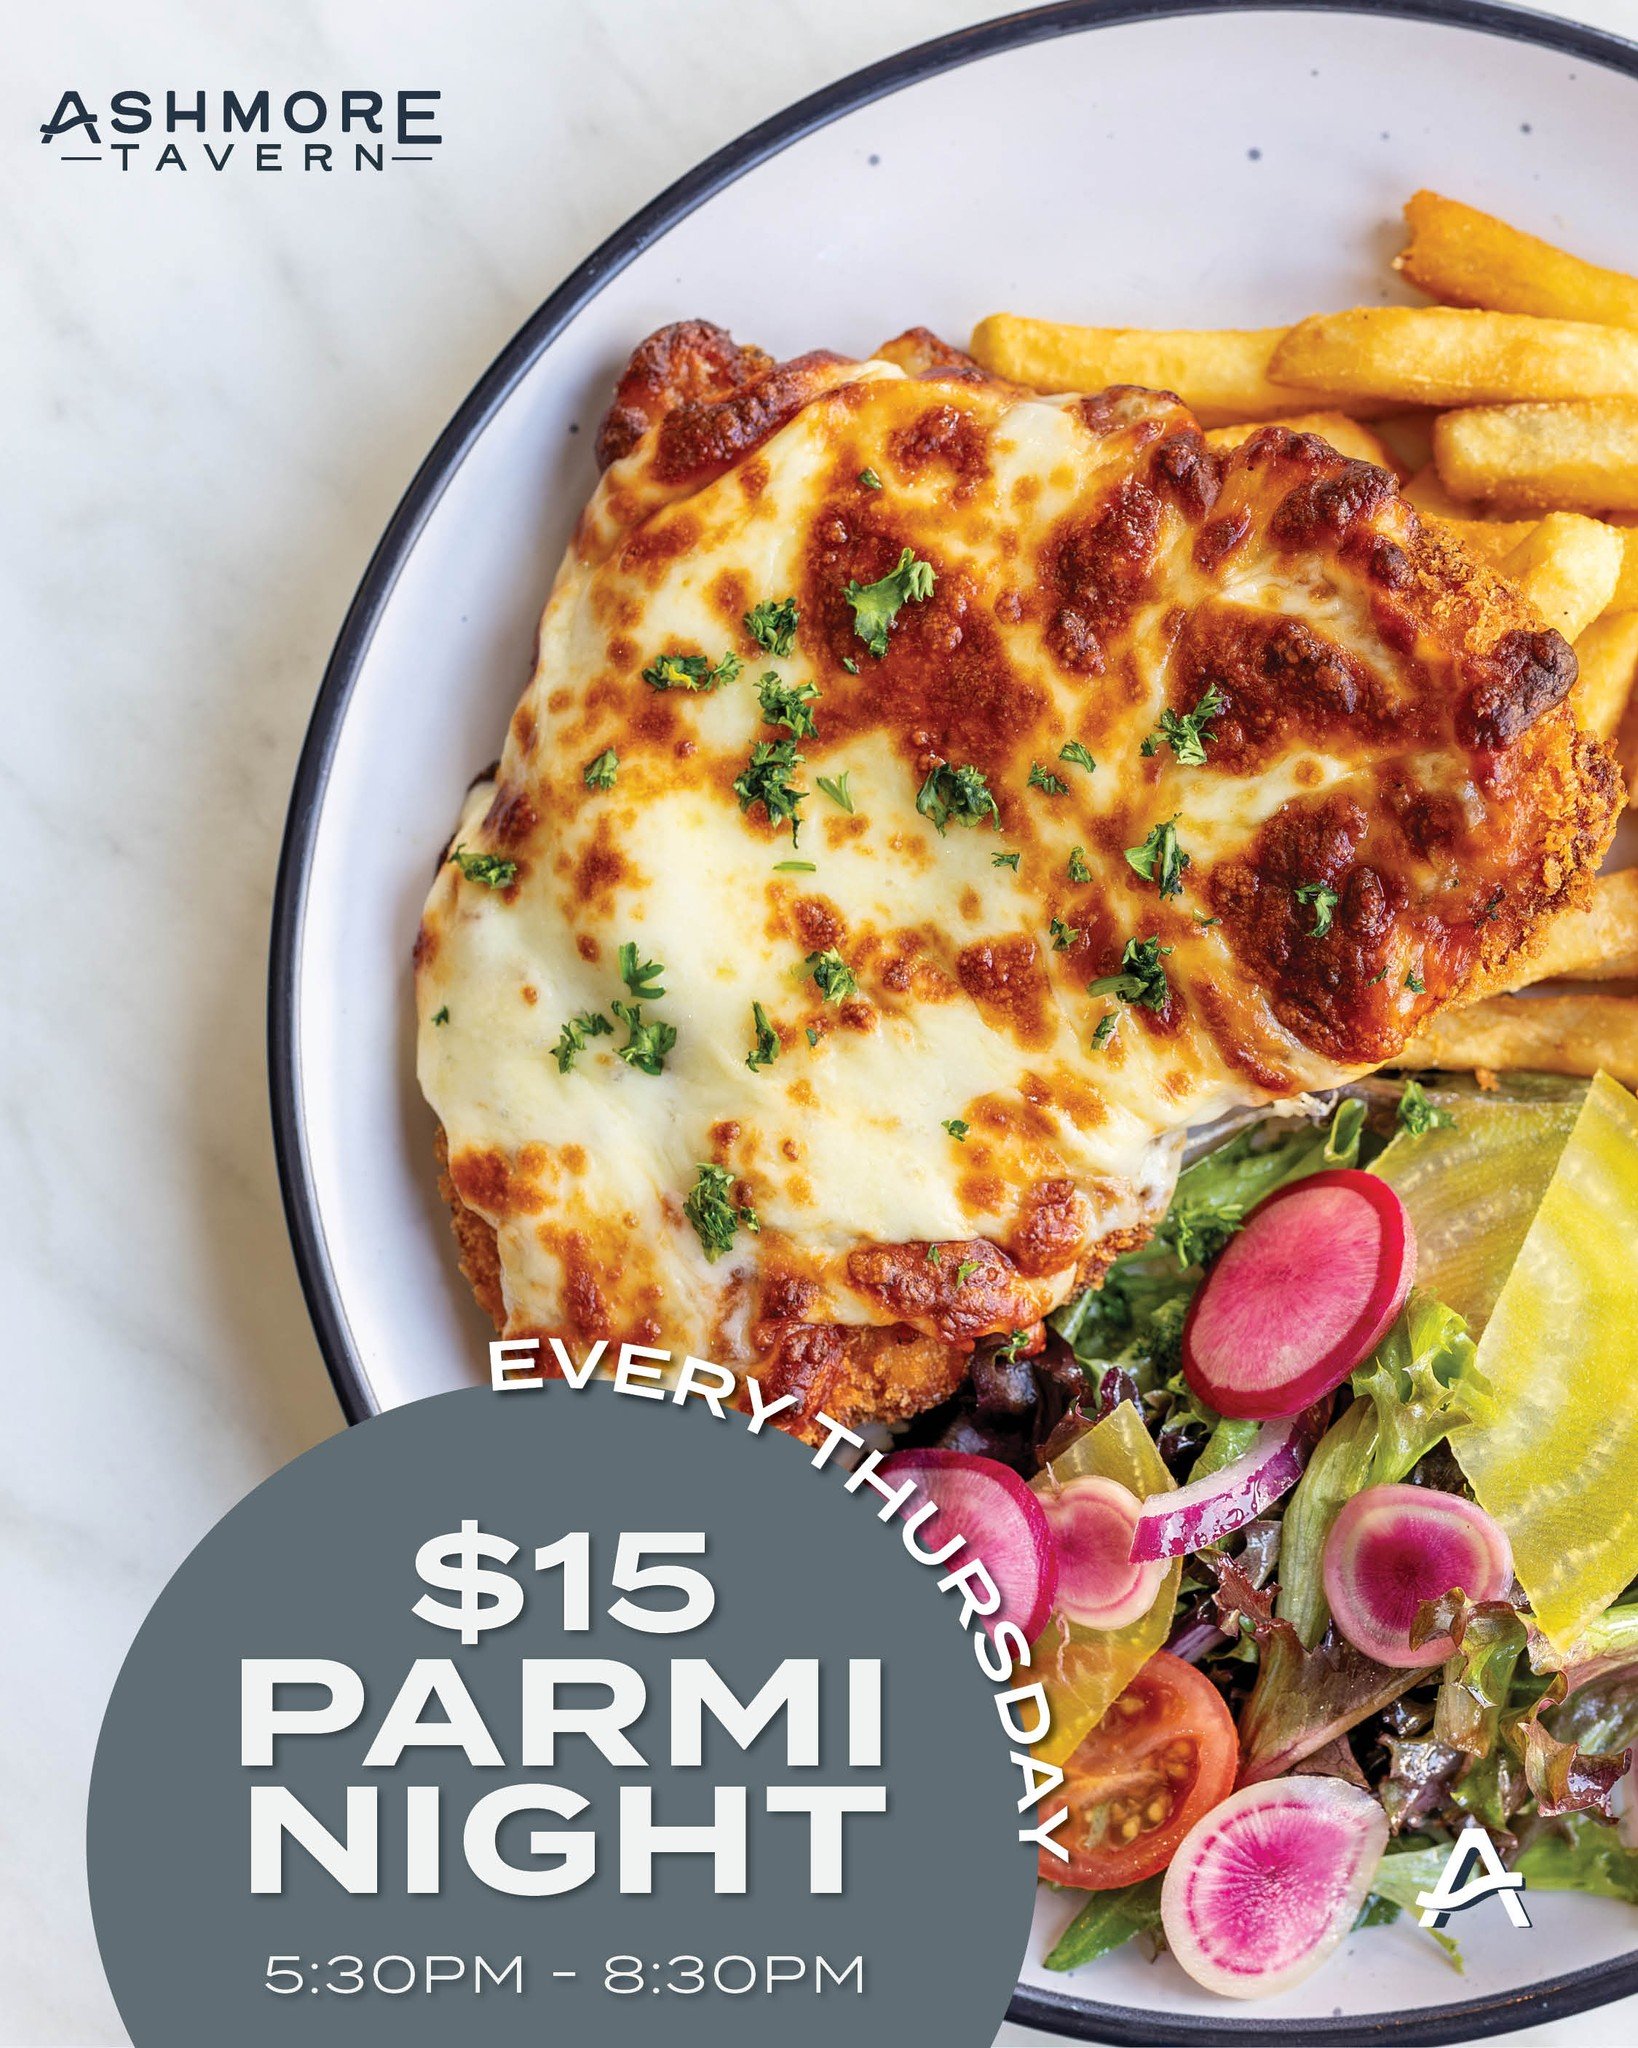 You can't buy happiness, but you can buy a parmi, and that's kind of the same thing! 😉

Enjoy our $15 Parmi Night special every Thursday night between 5:30pm to 8:30pm!

Book a table now with the link in our bio 📲 

#AshmoreTavern #ParmiNight #Ashm